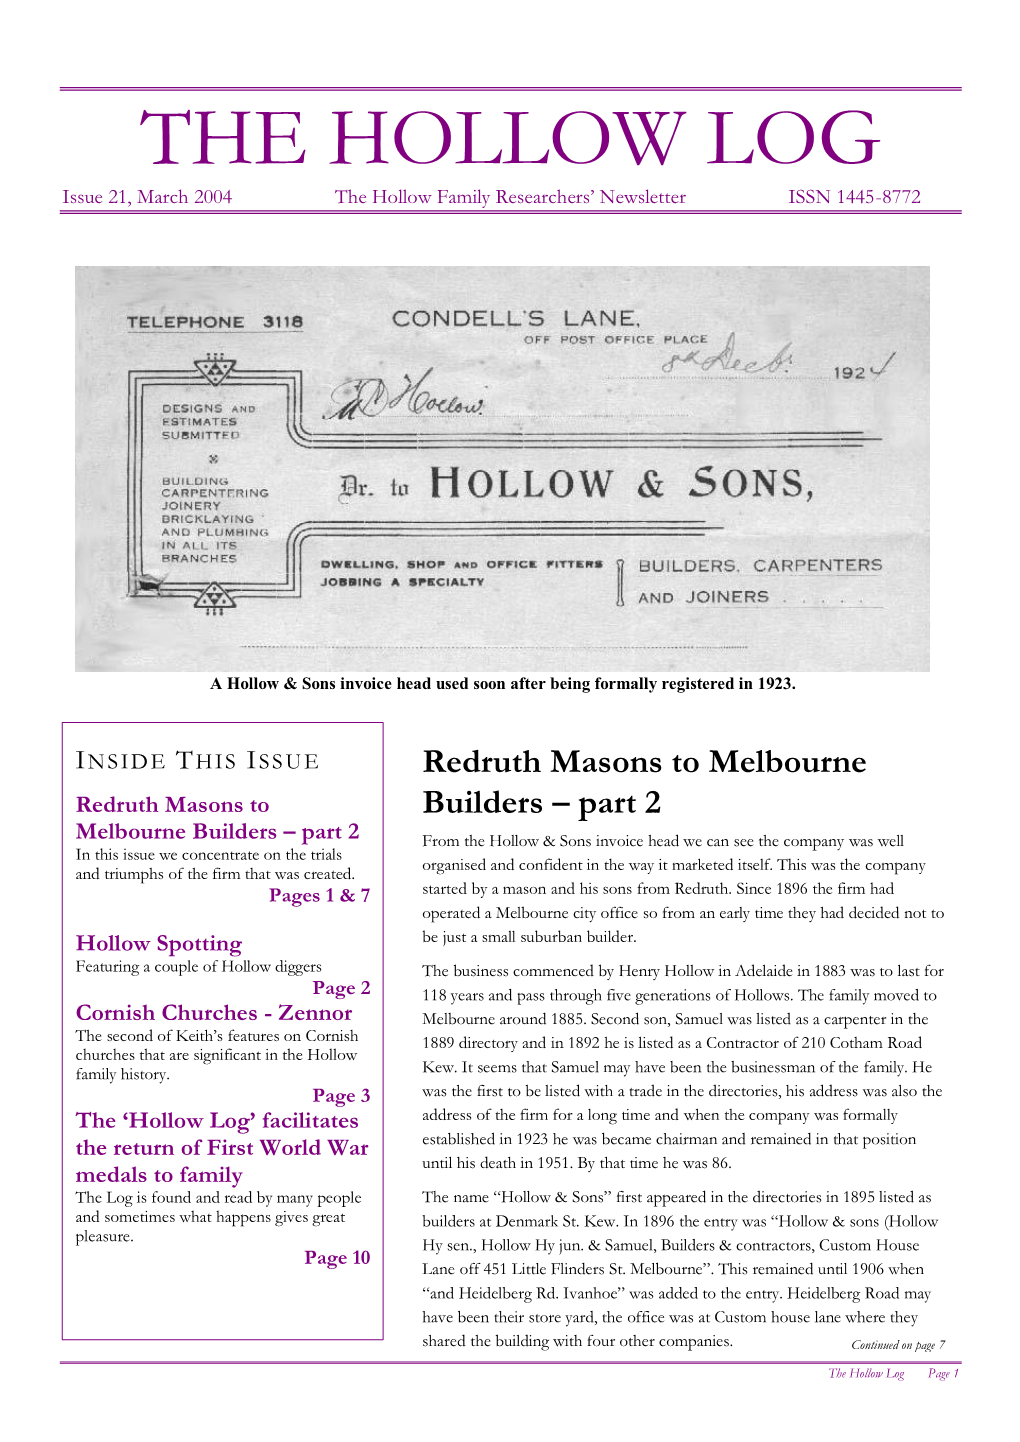 The Hollow Log, Issue 21, March 2004